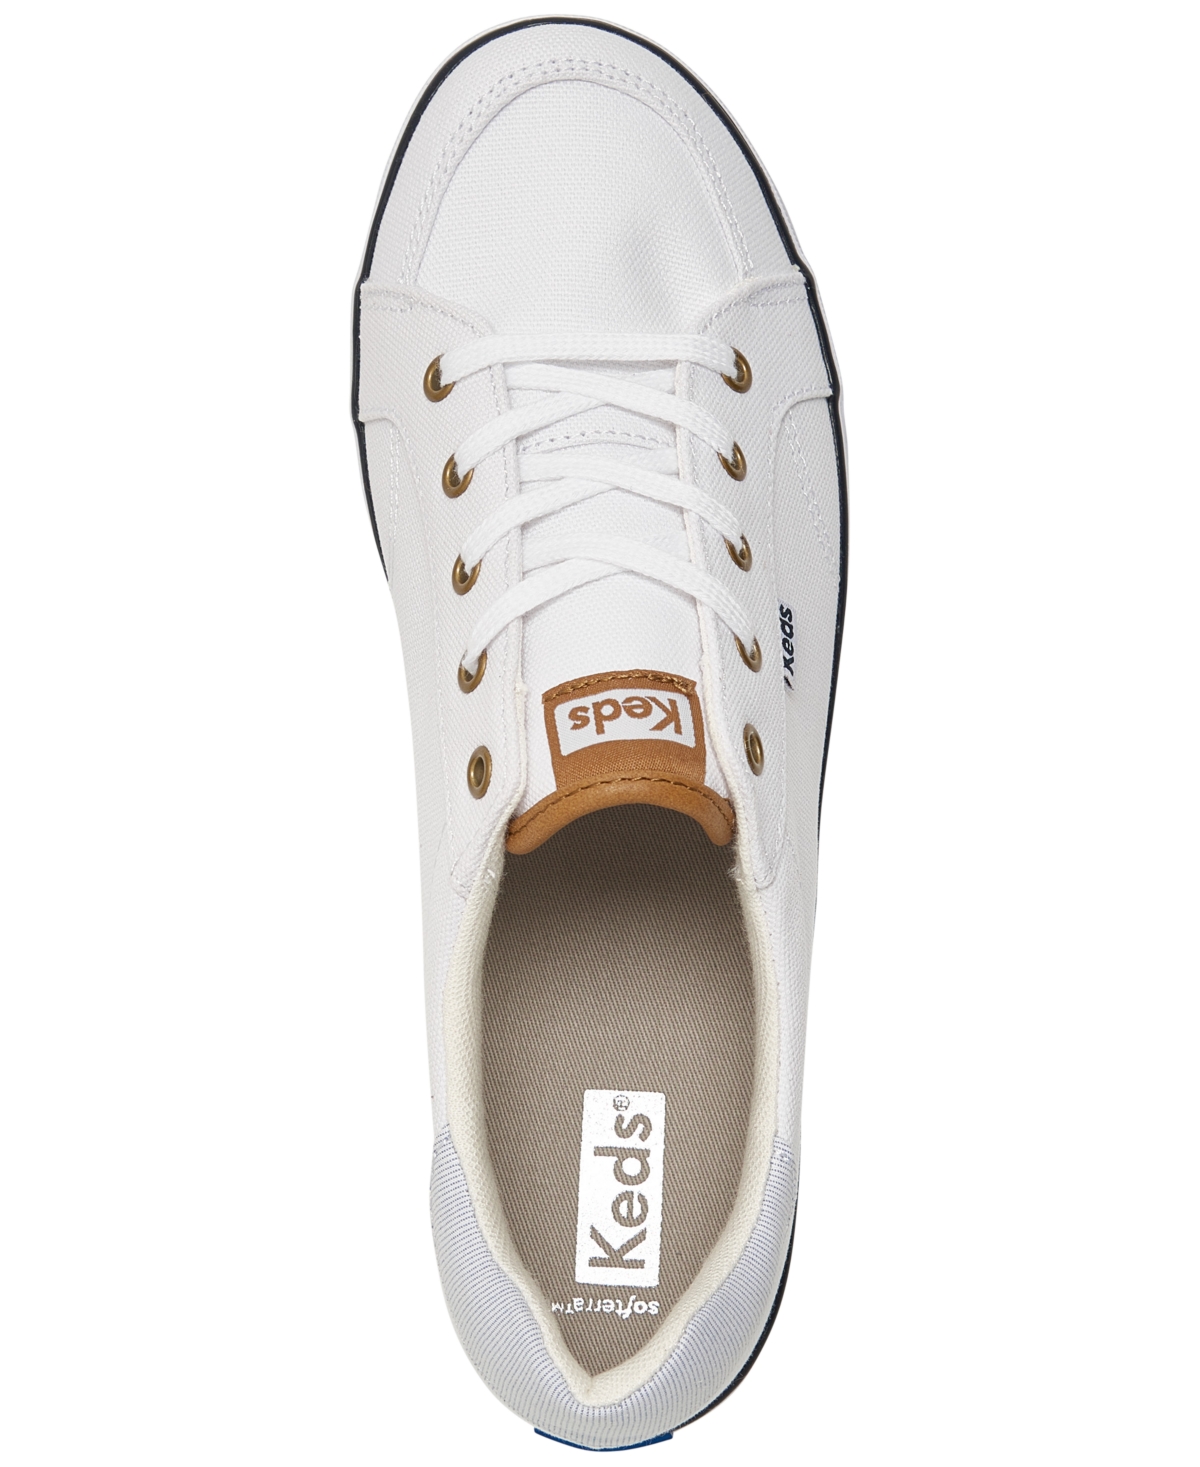 Shop Keds Women's Center Iii Canvas Casual Sneakers From Finish Line In White